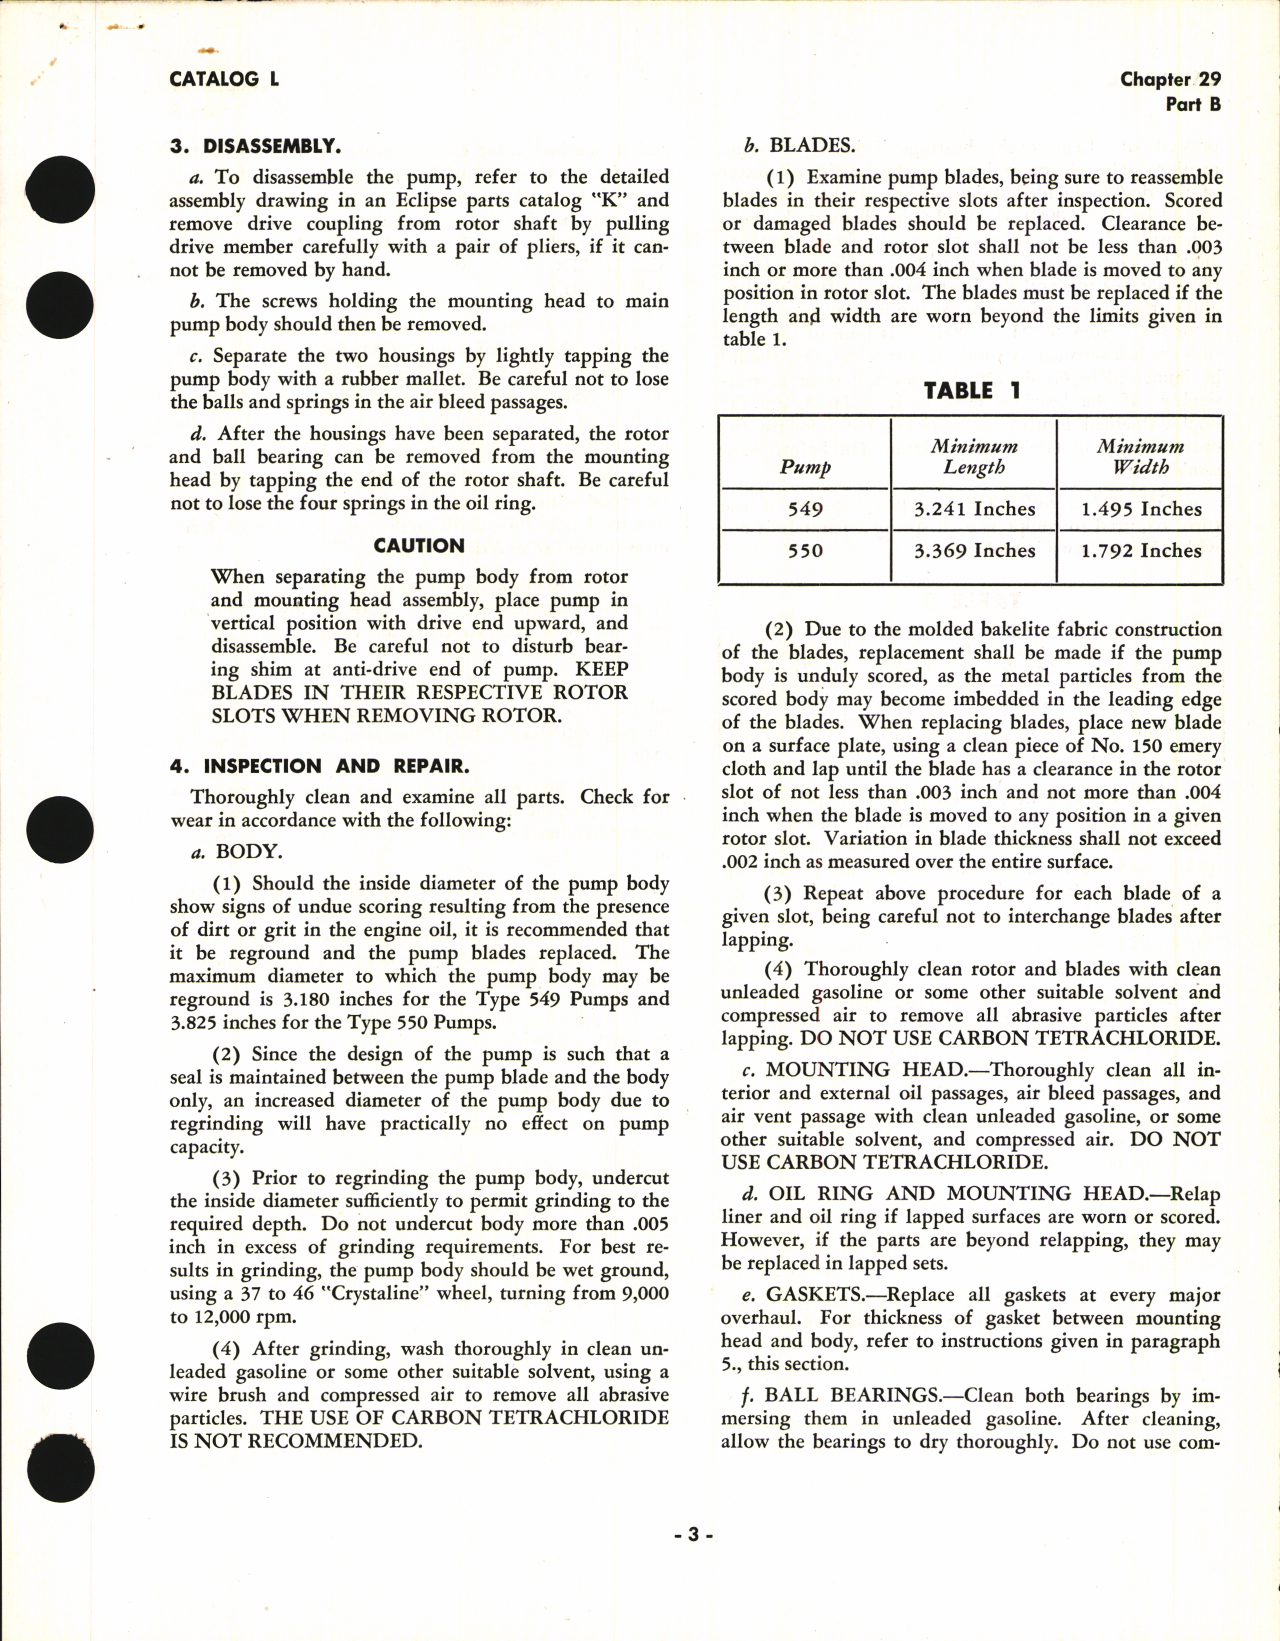 Sample page 3 from AirCorps Library document: Overhaul Instructions for Eclipse Aviation Engine-Driven Air Pumps Types 549 and 550